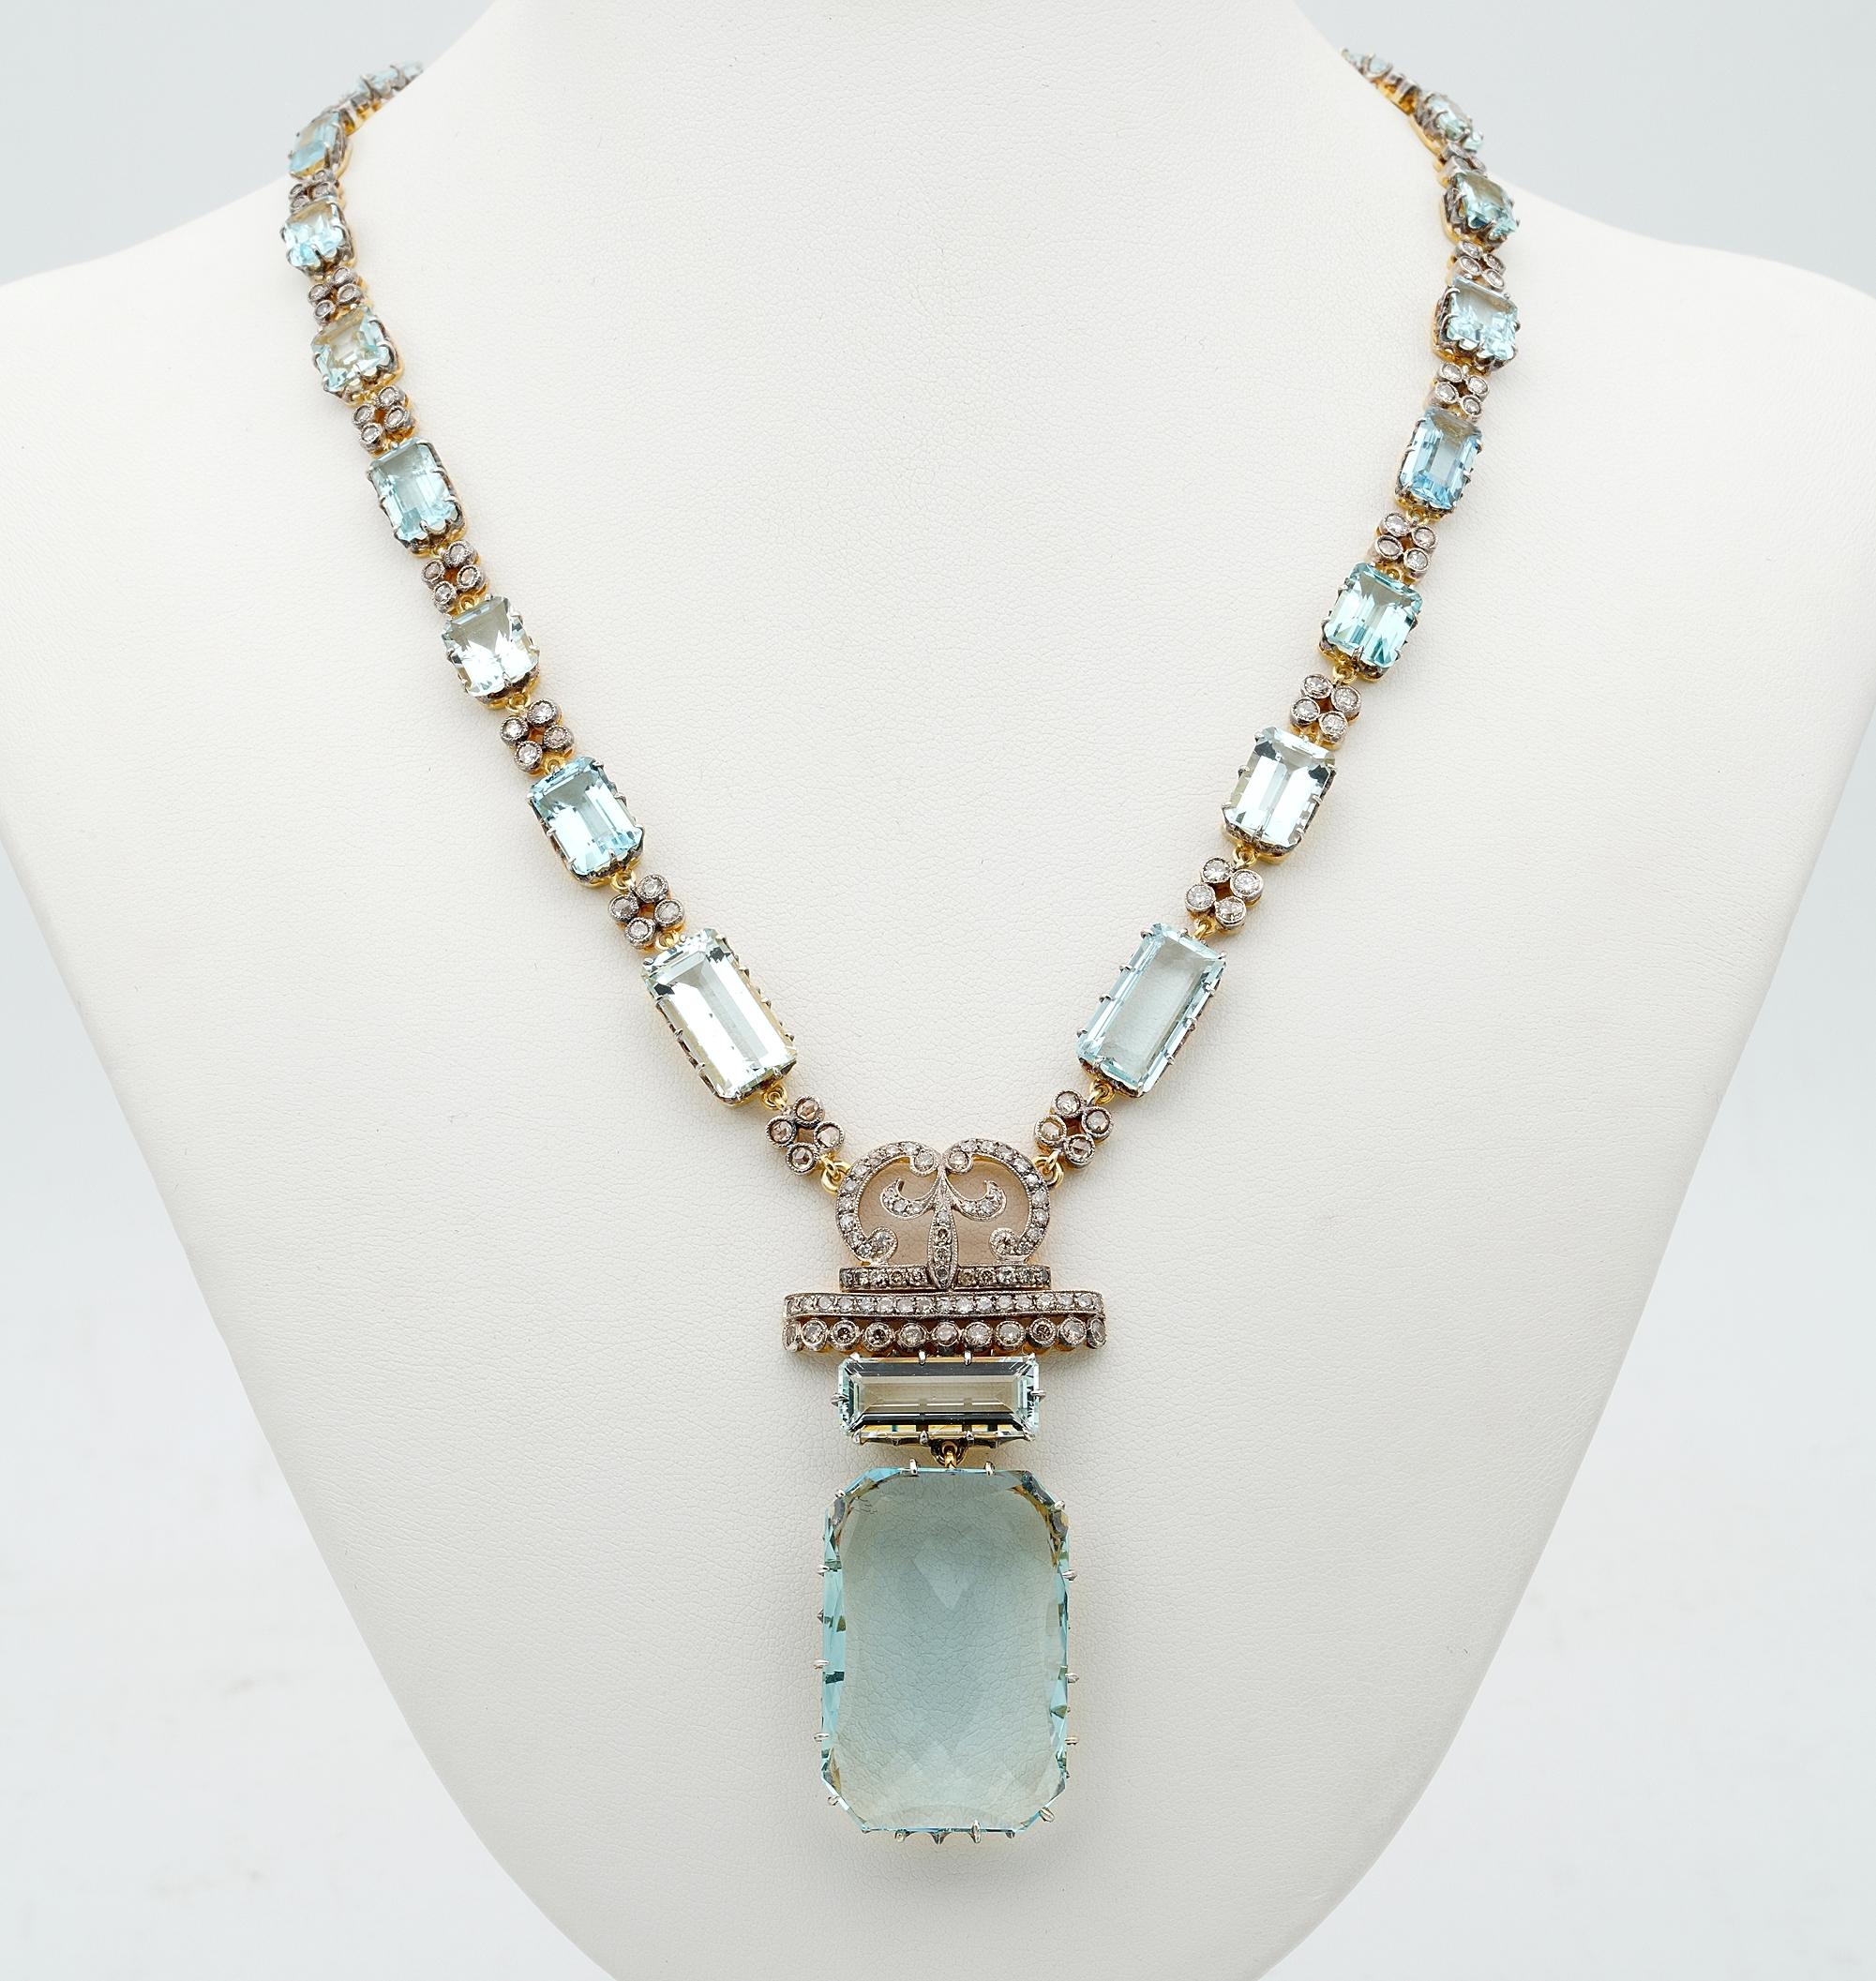 Rare in Beauty
An Impressive necklace, created as unique during the late 30/40’s
Set throughout by natural untreated Aquamarine varying in sizes to fit the design
Complemented by rose cut Diamonds and round cuts giving life to a timeless art